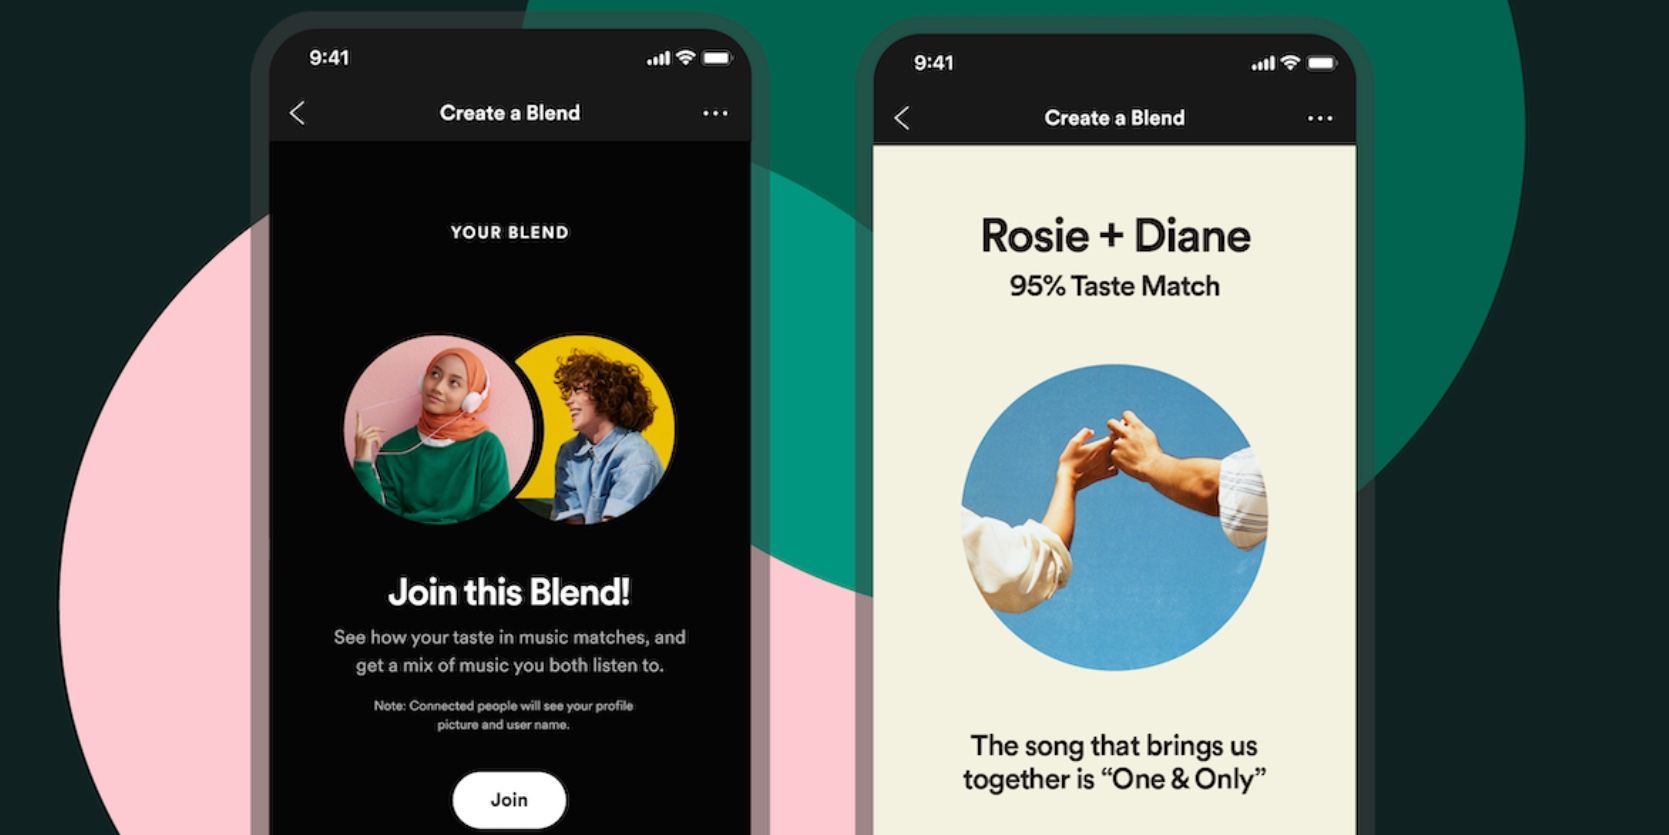 Promotional image for the new spotify blend feature.